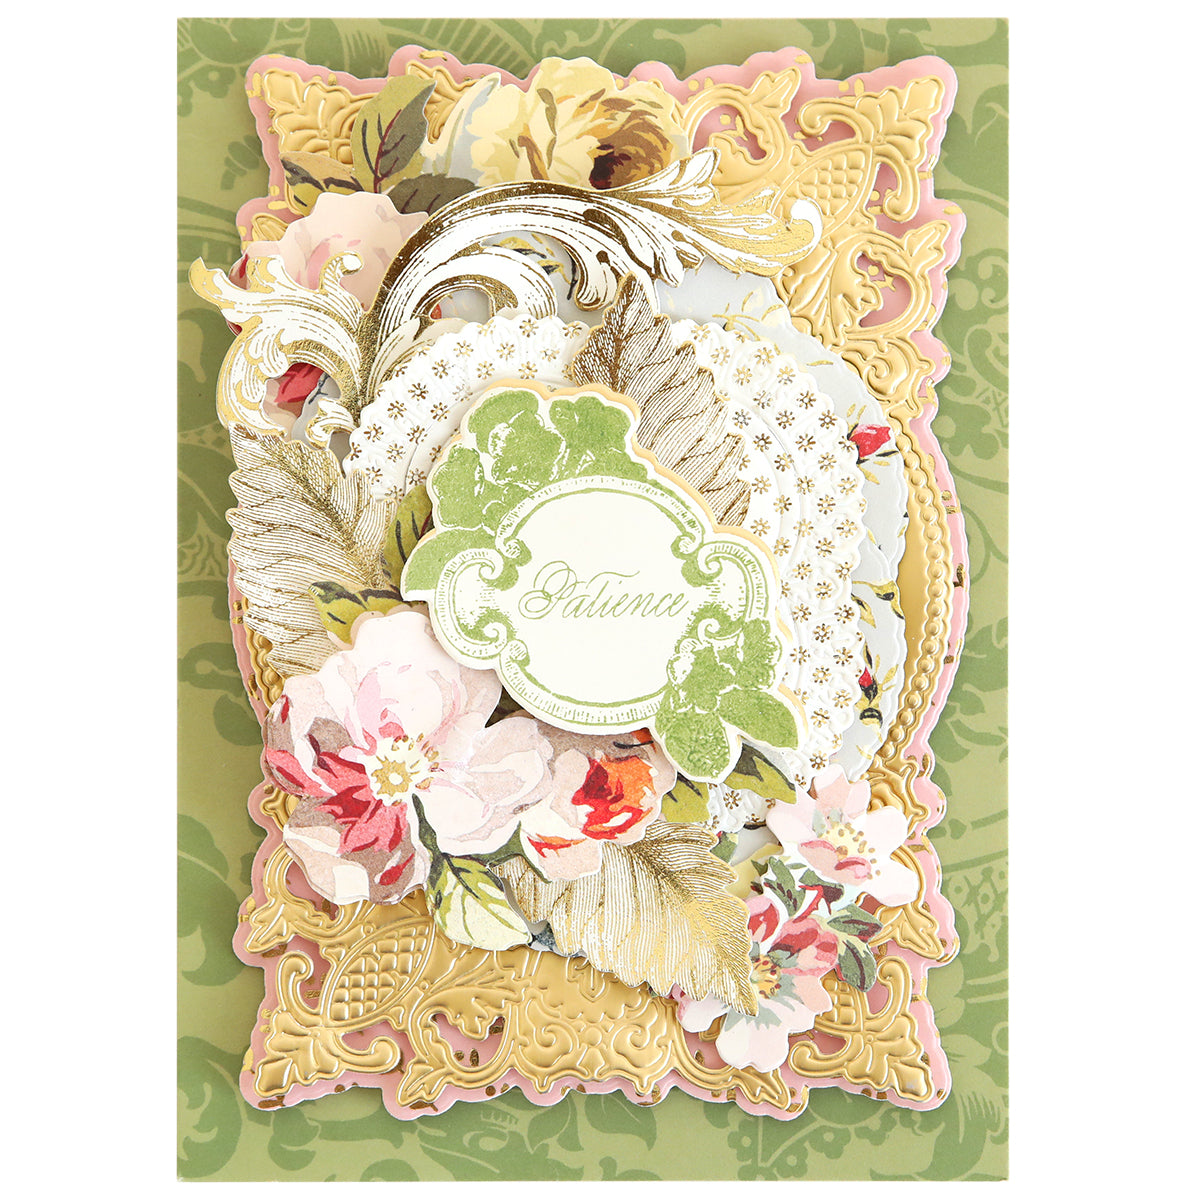 An ornate, 3d greeting card with floral designs and dies, including the word "patience" written in the center using Flower Language Stamps and Dies.